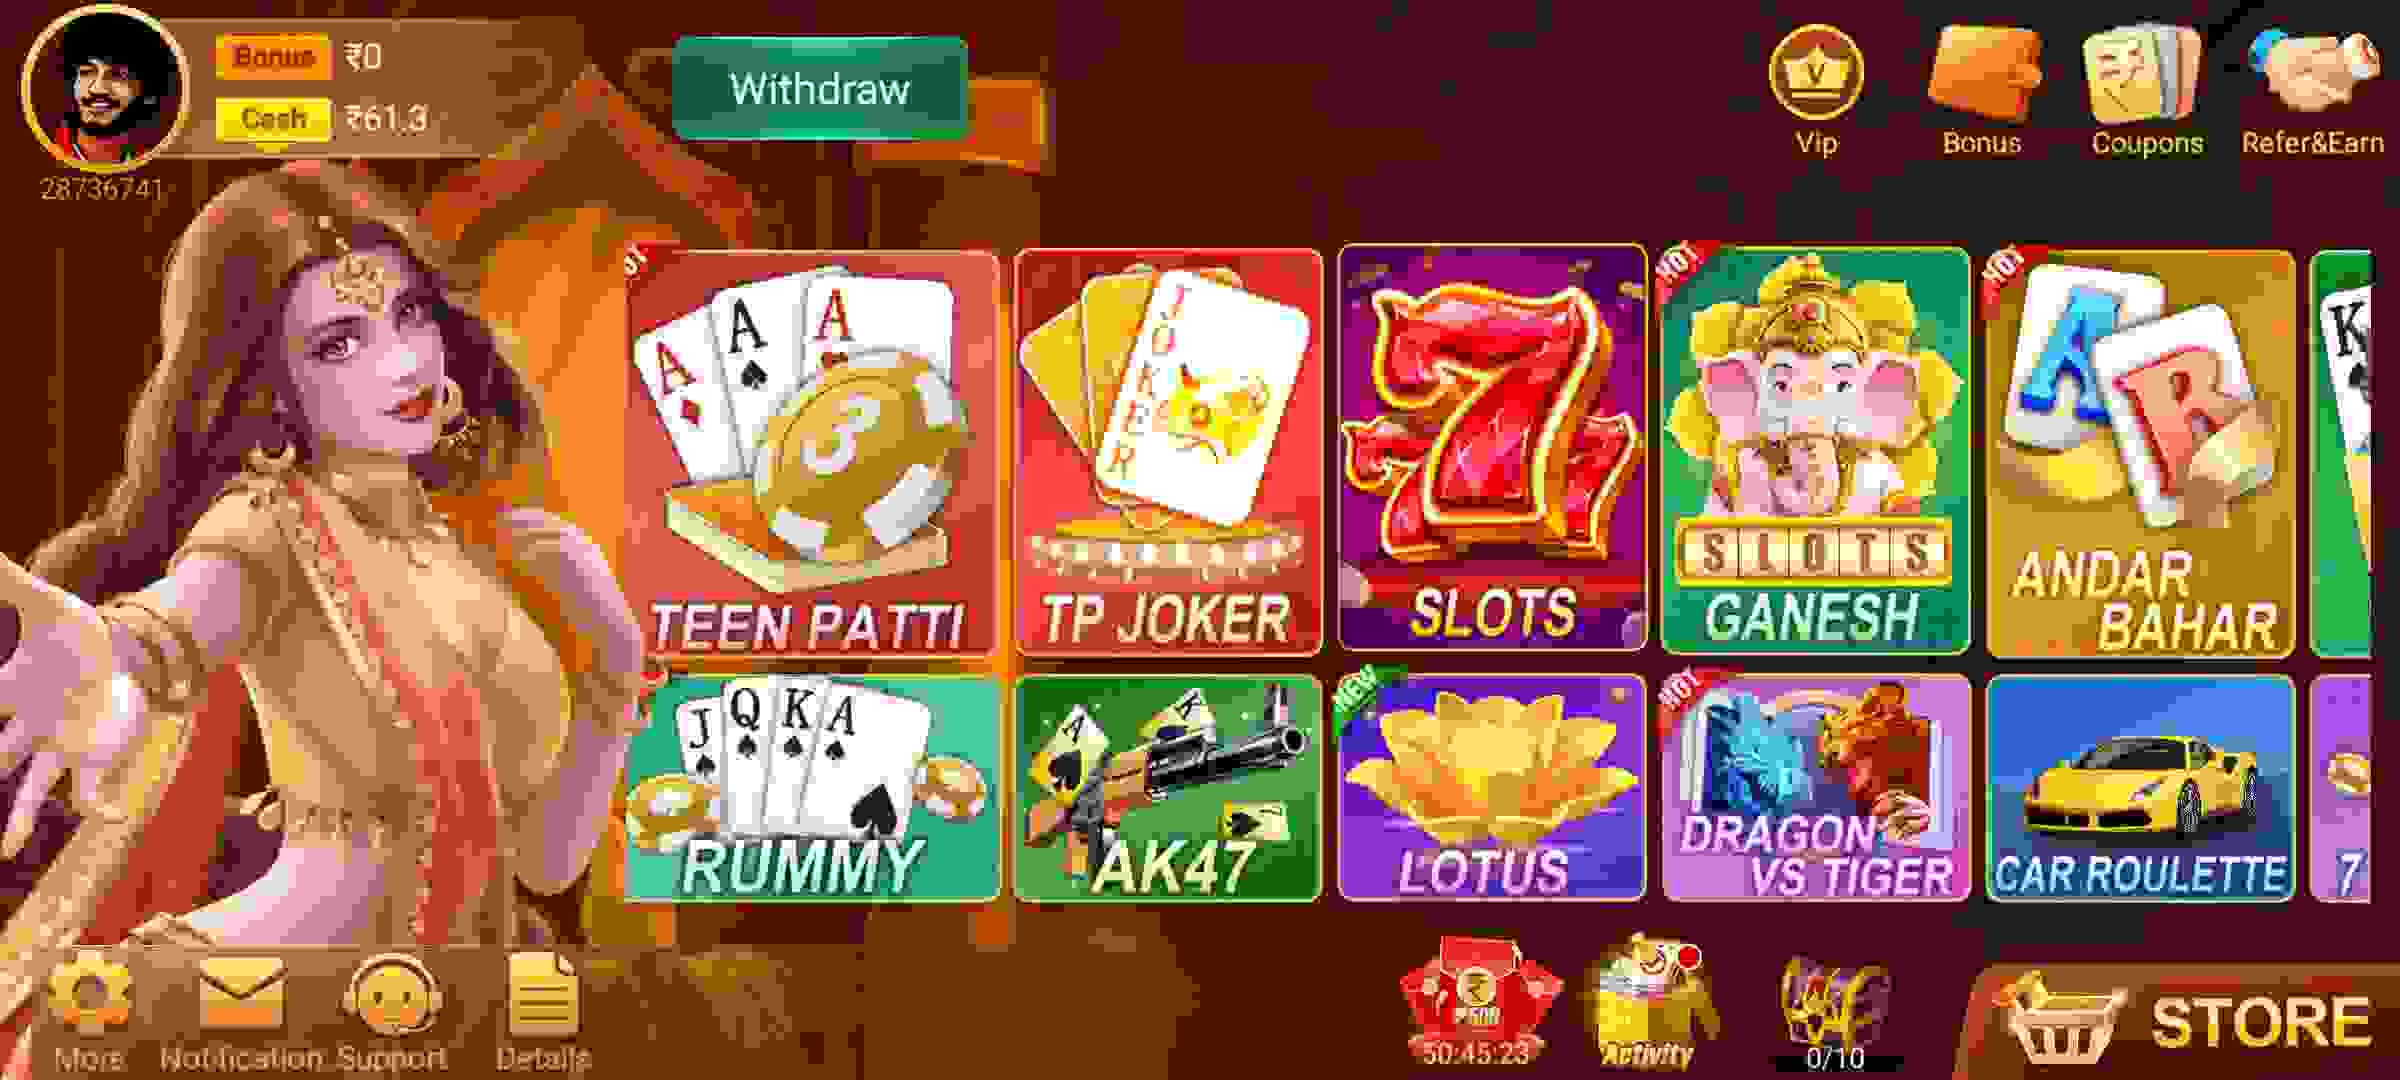 Games Available in Teen Patti Rang Online APK